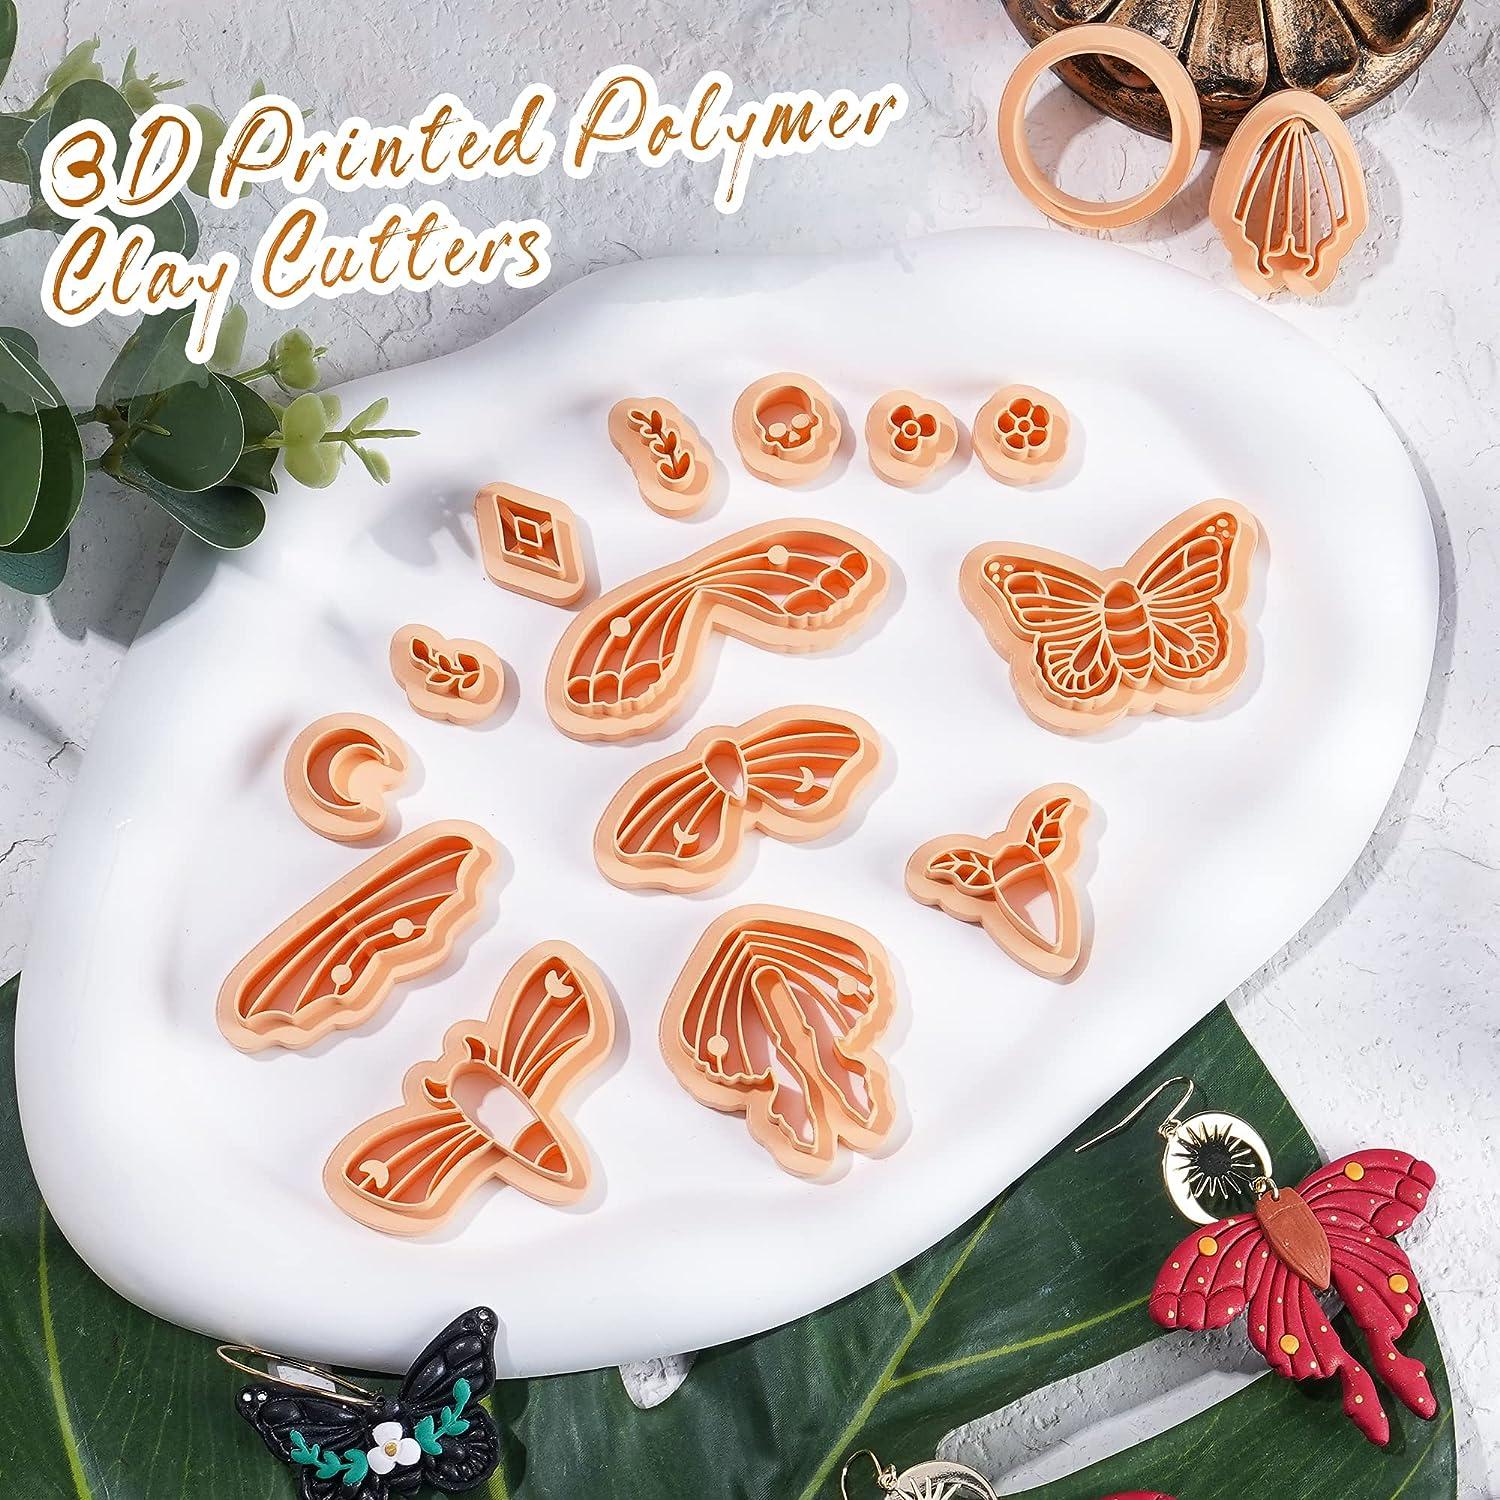 Puocaon Luna Moth Polymer Clay Cutters - 16 Shapes Clay Cutters for Earrings  Moth Shapes Clay Cutters for Polymer Clay Jewelry Making Mystical Drop  Dangle Earrings Clay Earring Cutters